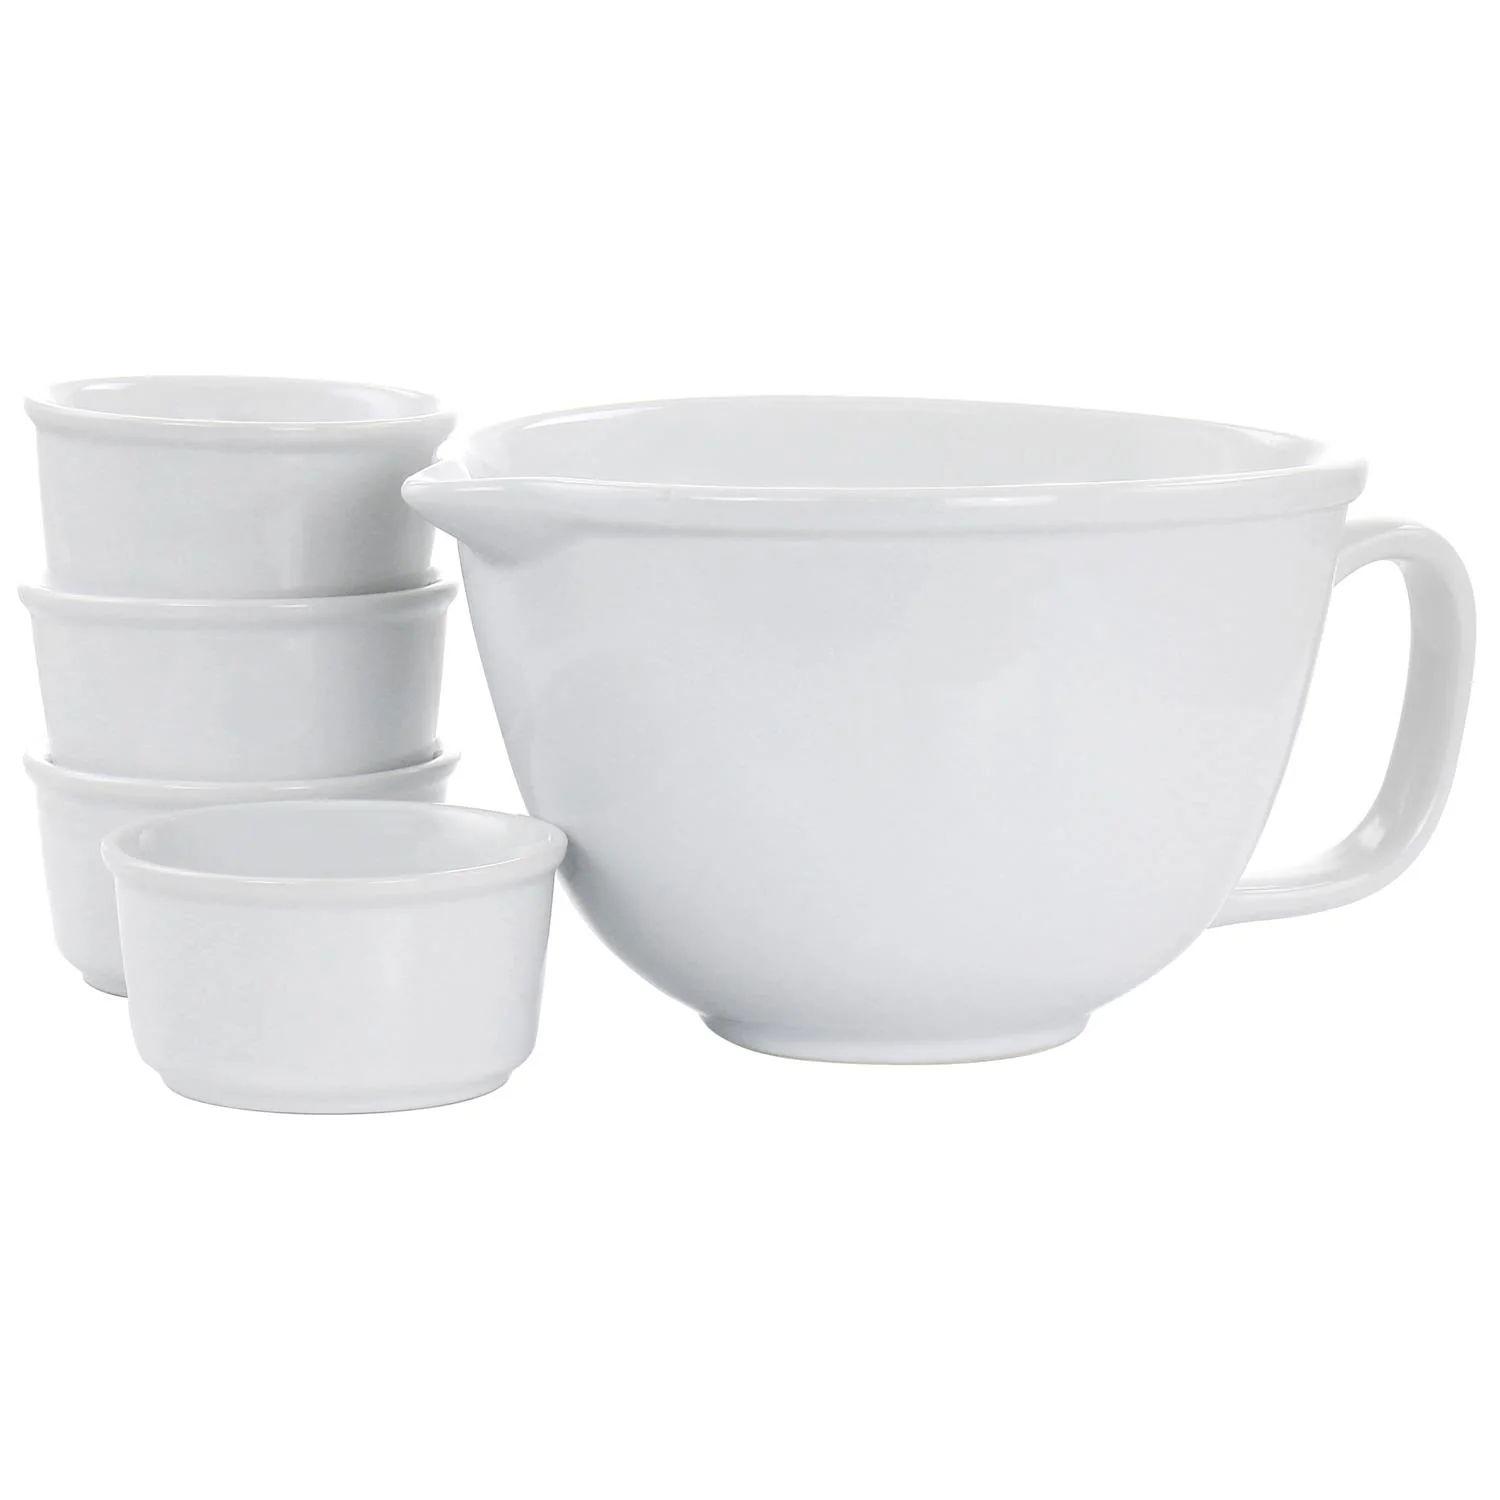 Gibson Elite Gracious Dining 5 Piece Ramekin and Mixing Bowl Set in White 5 Piece Set Lord & Taylor | Lord & Taylor